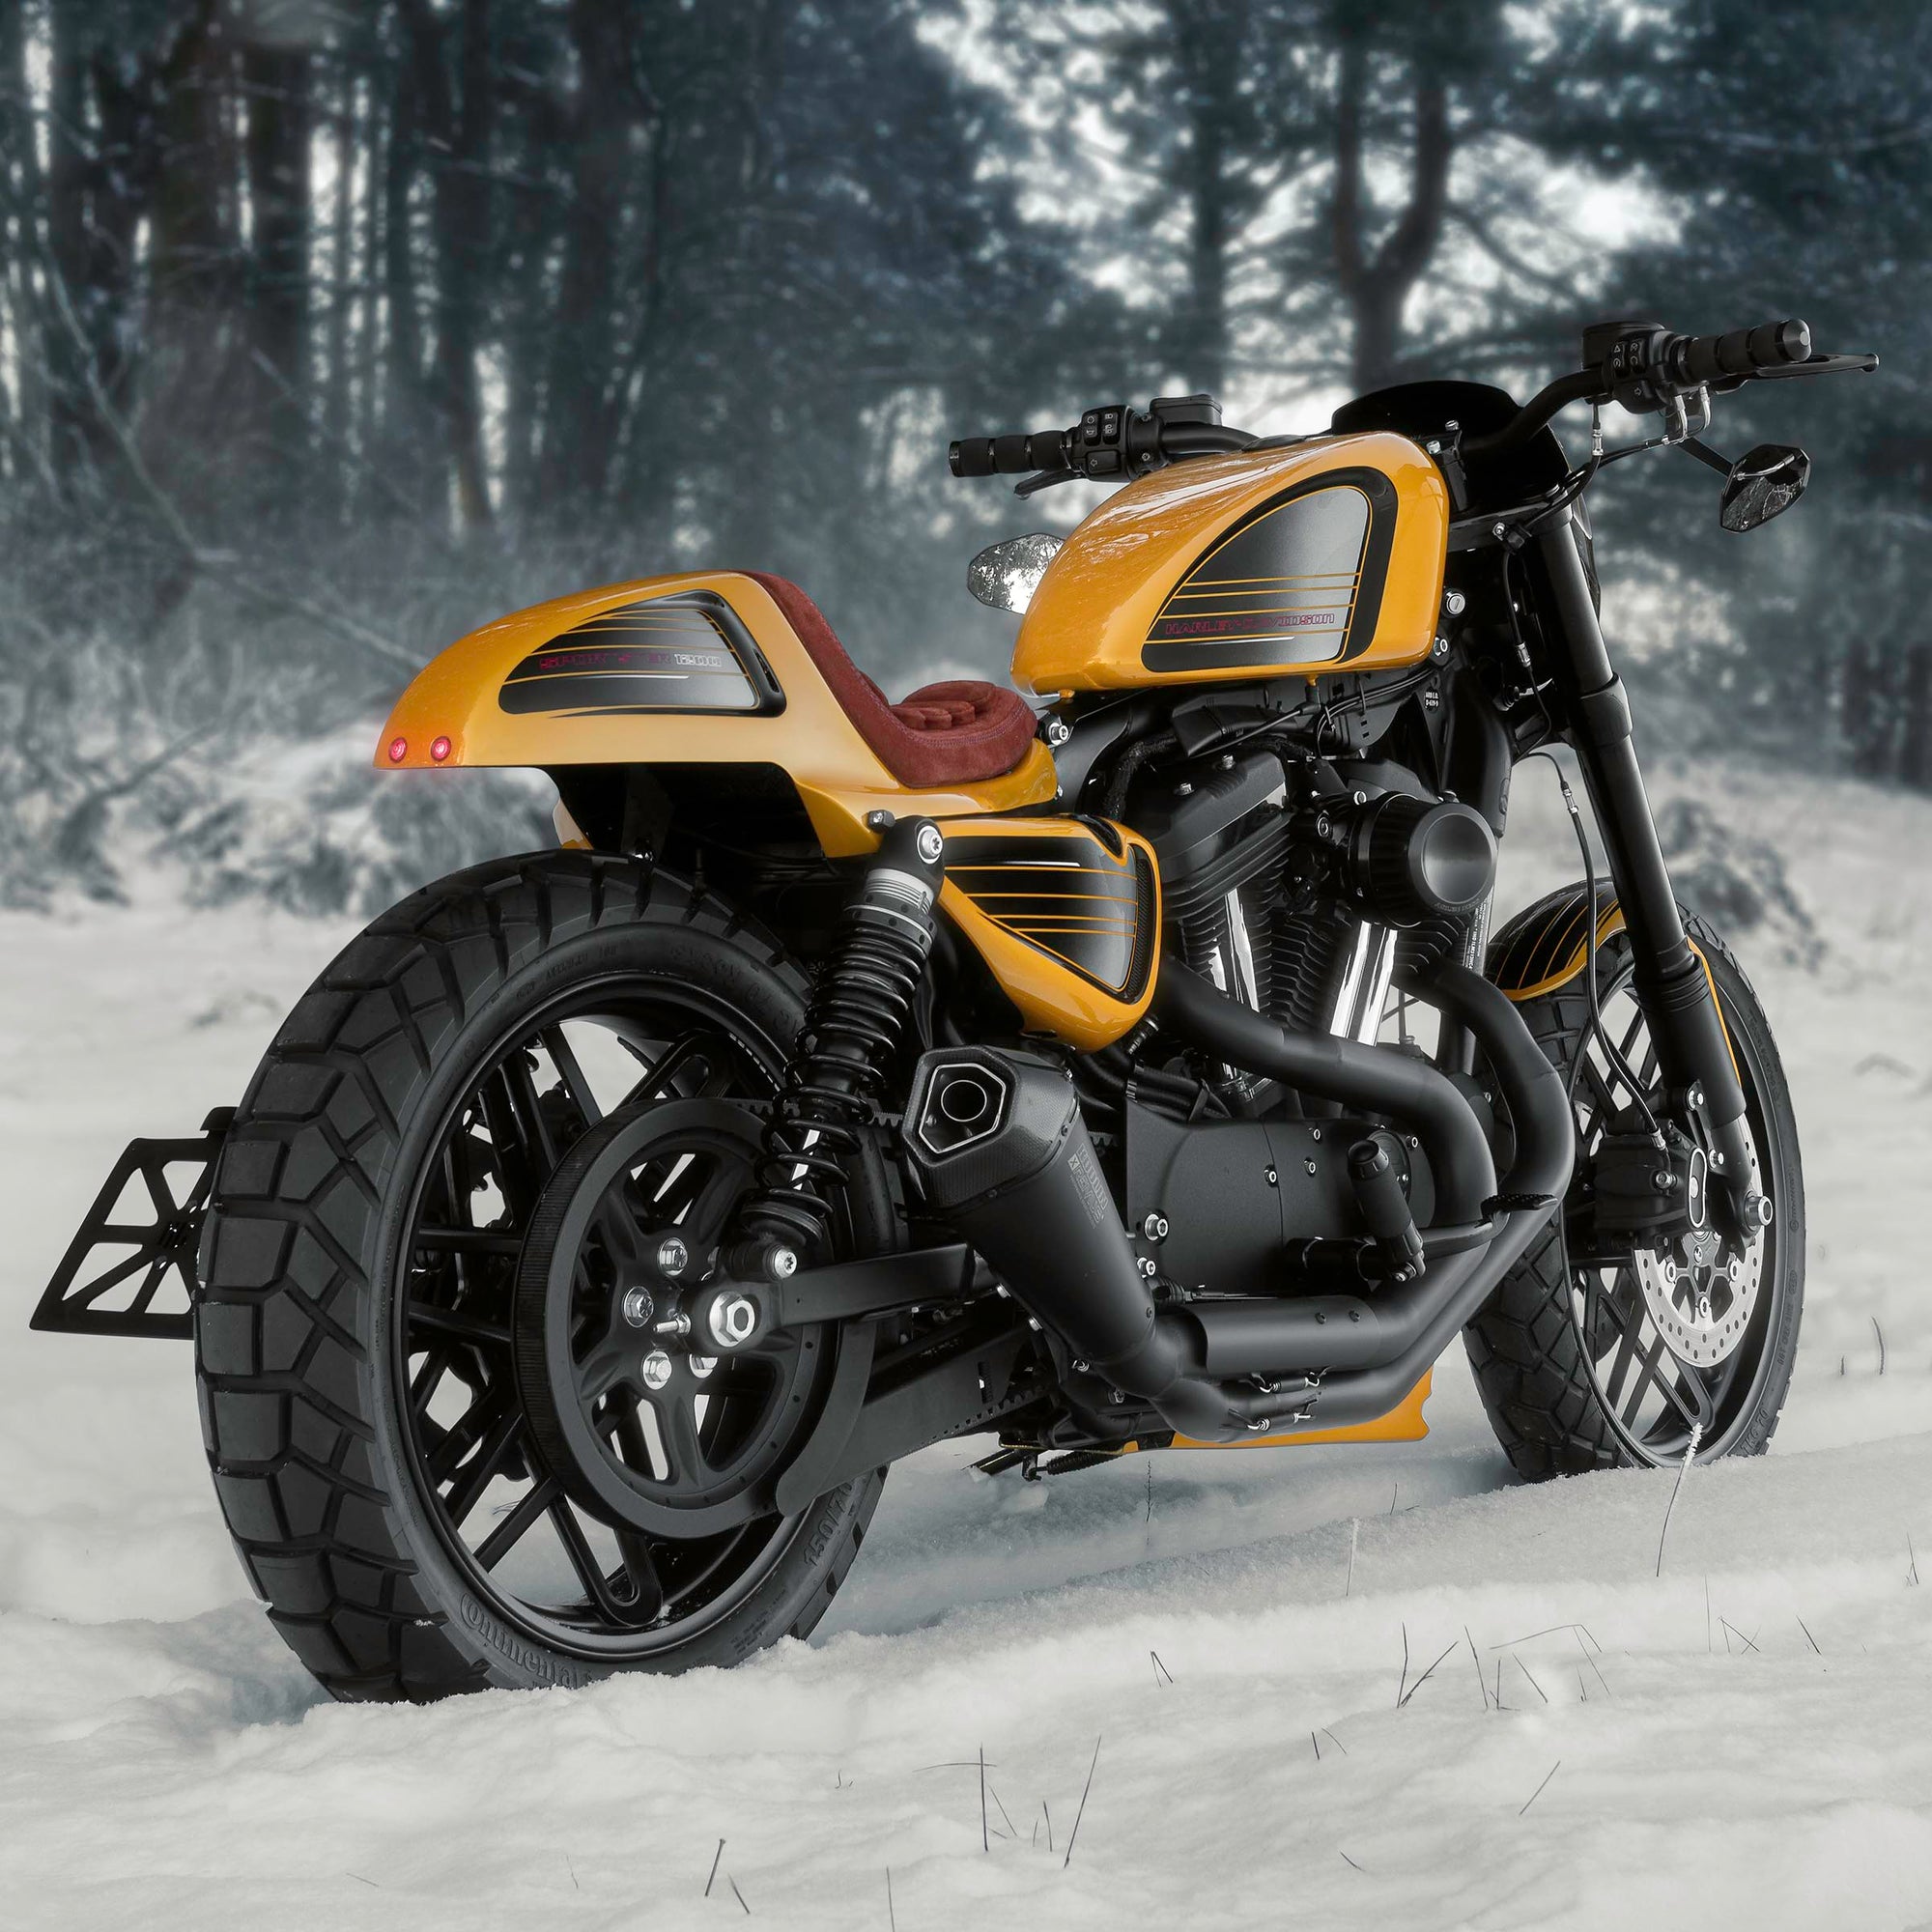 Modified Harley Davidson Roadster motorcycle with Killer Custom parts from the rear with some snowy trees in the background